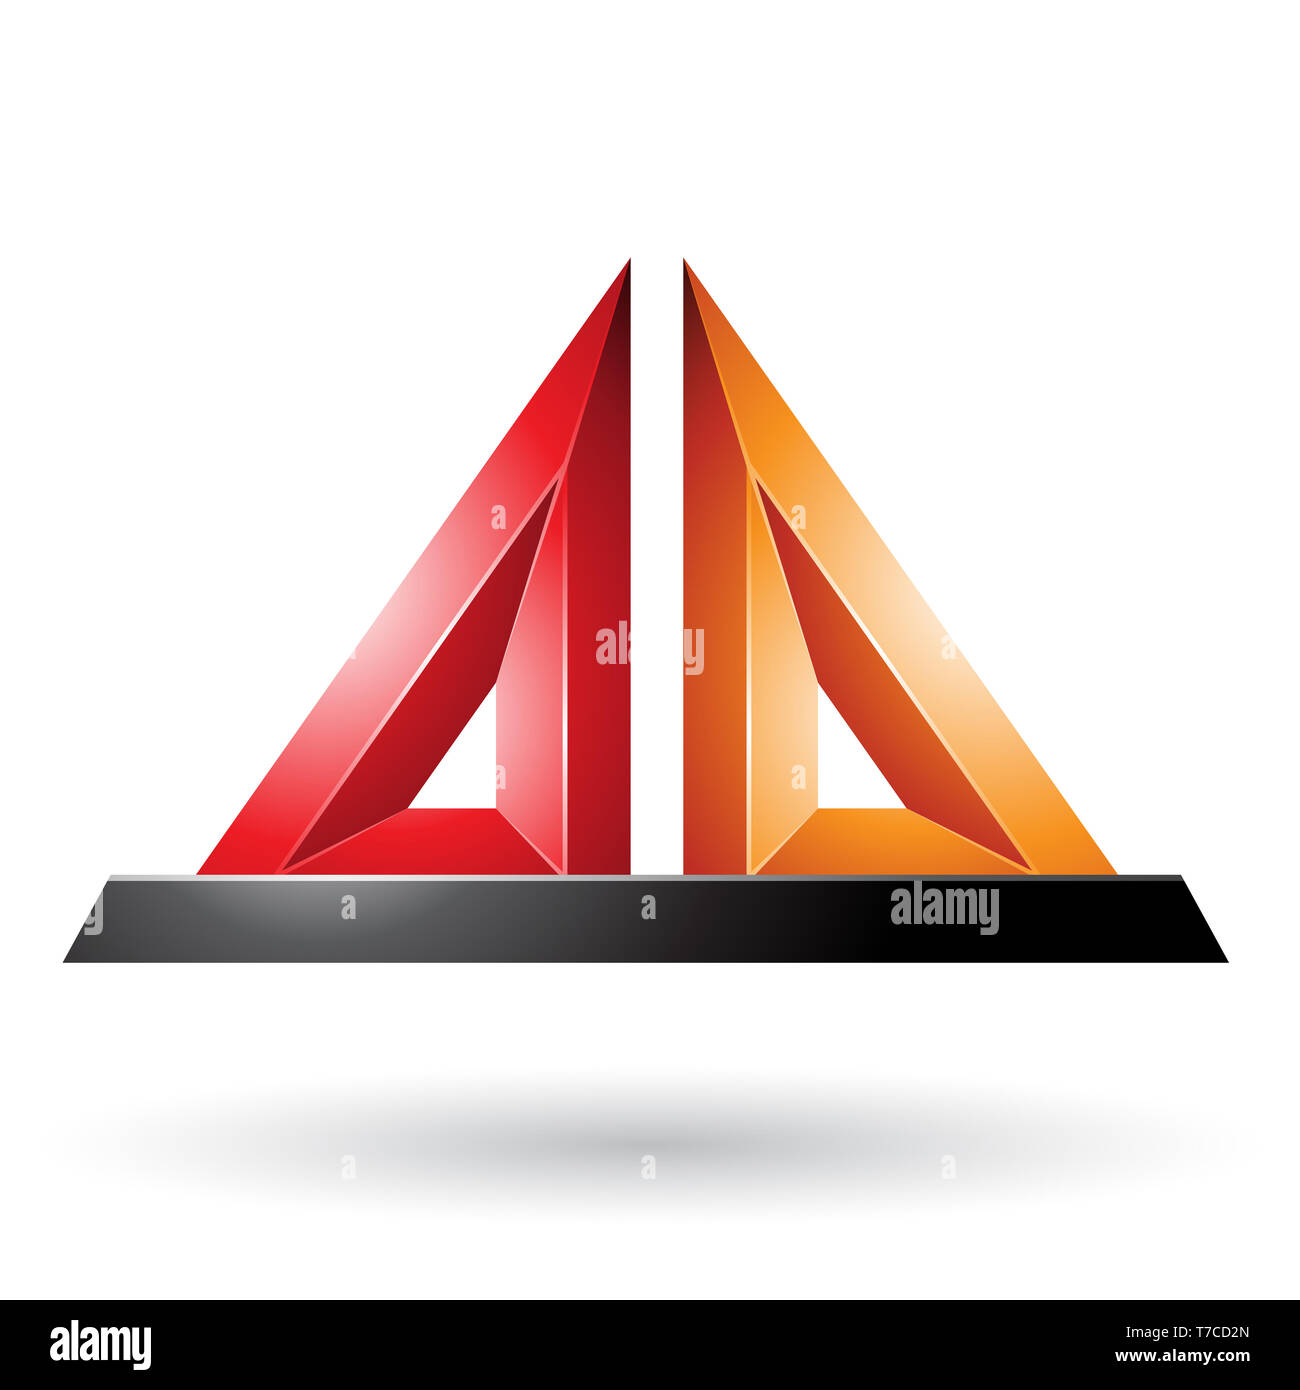 Vector Illustration of Red and Orange 3d Pyramidical Embossed Shape isolated on a White Background Stock Photo